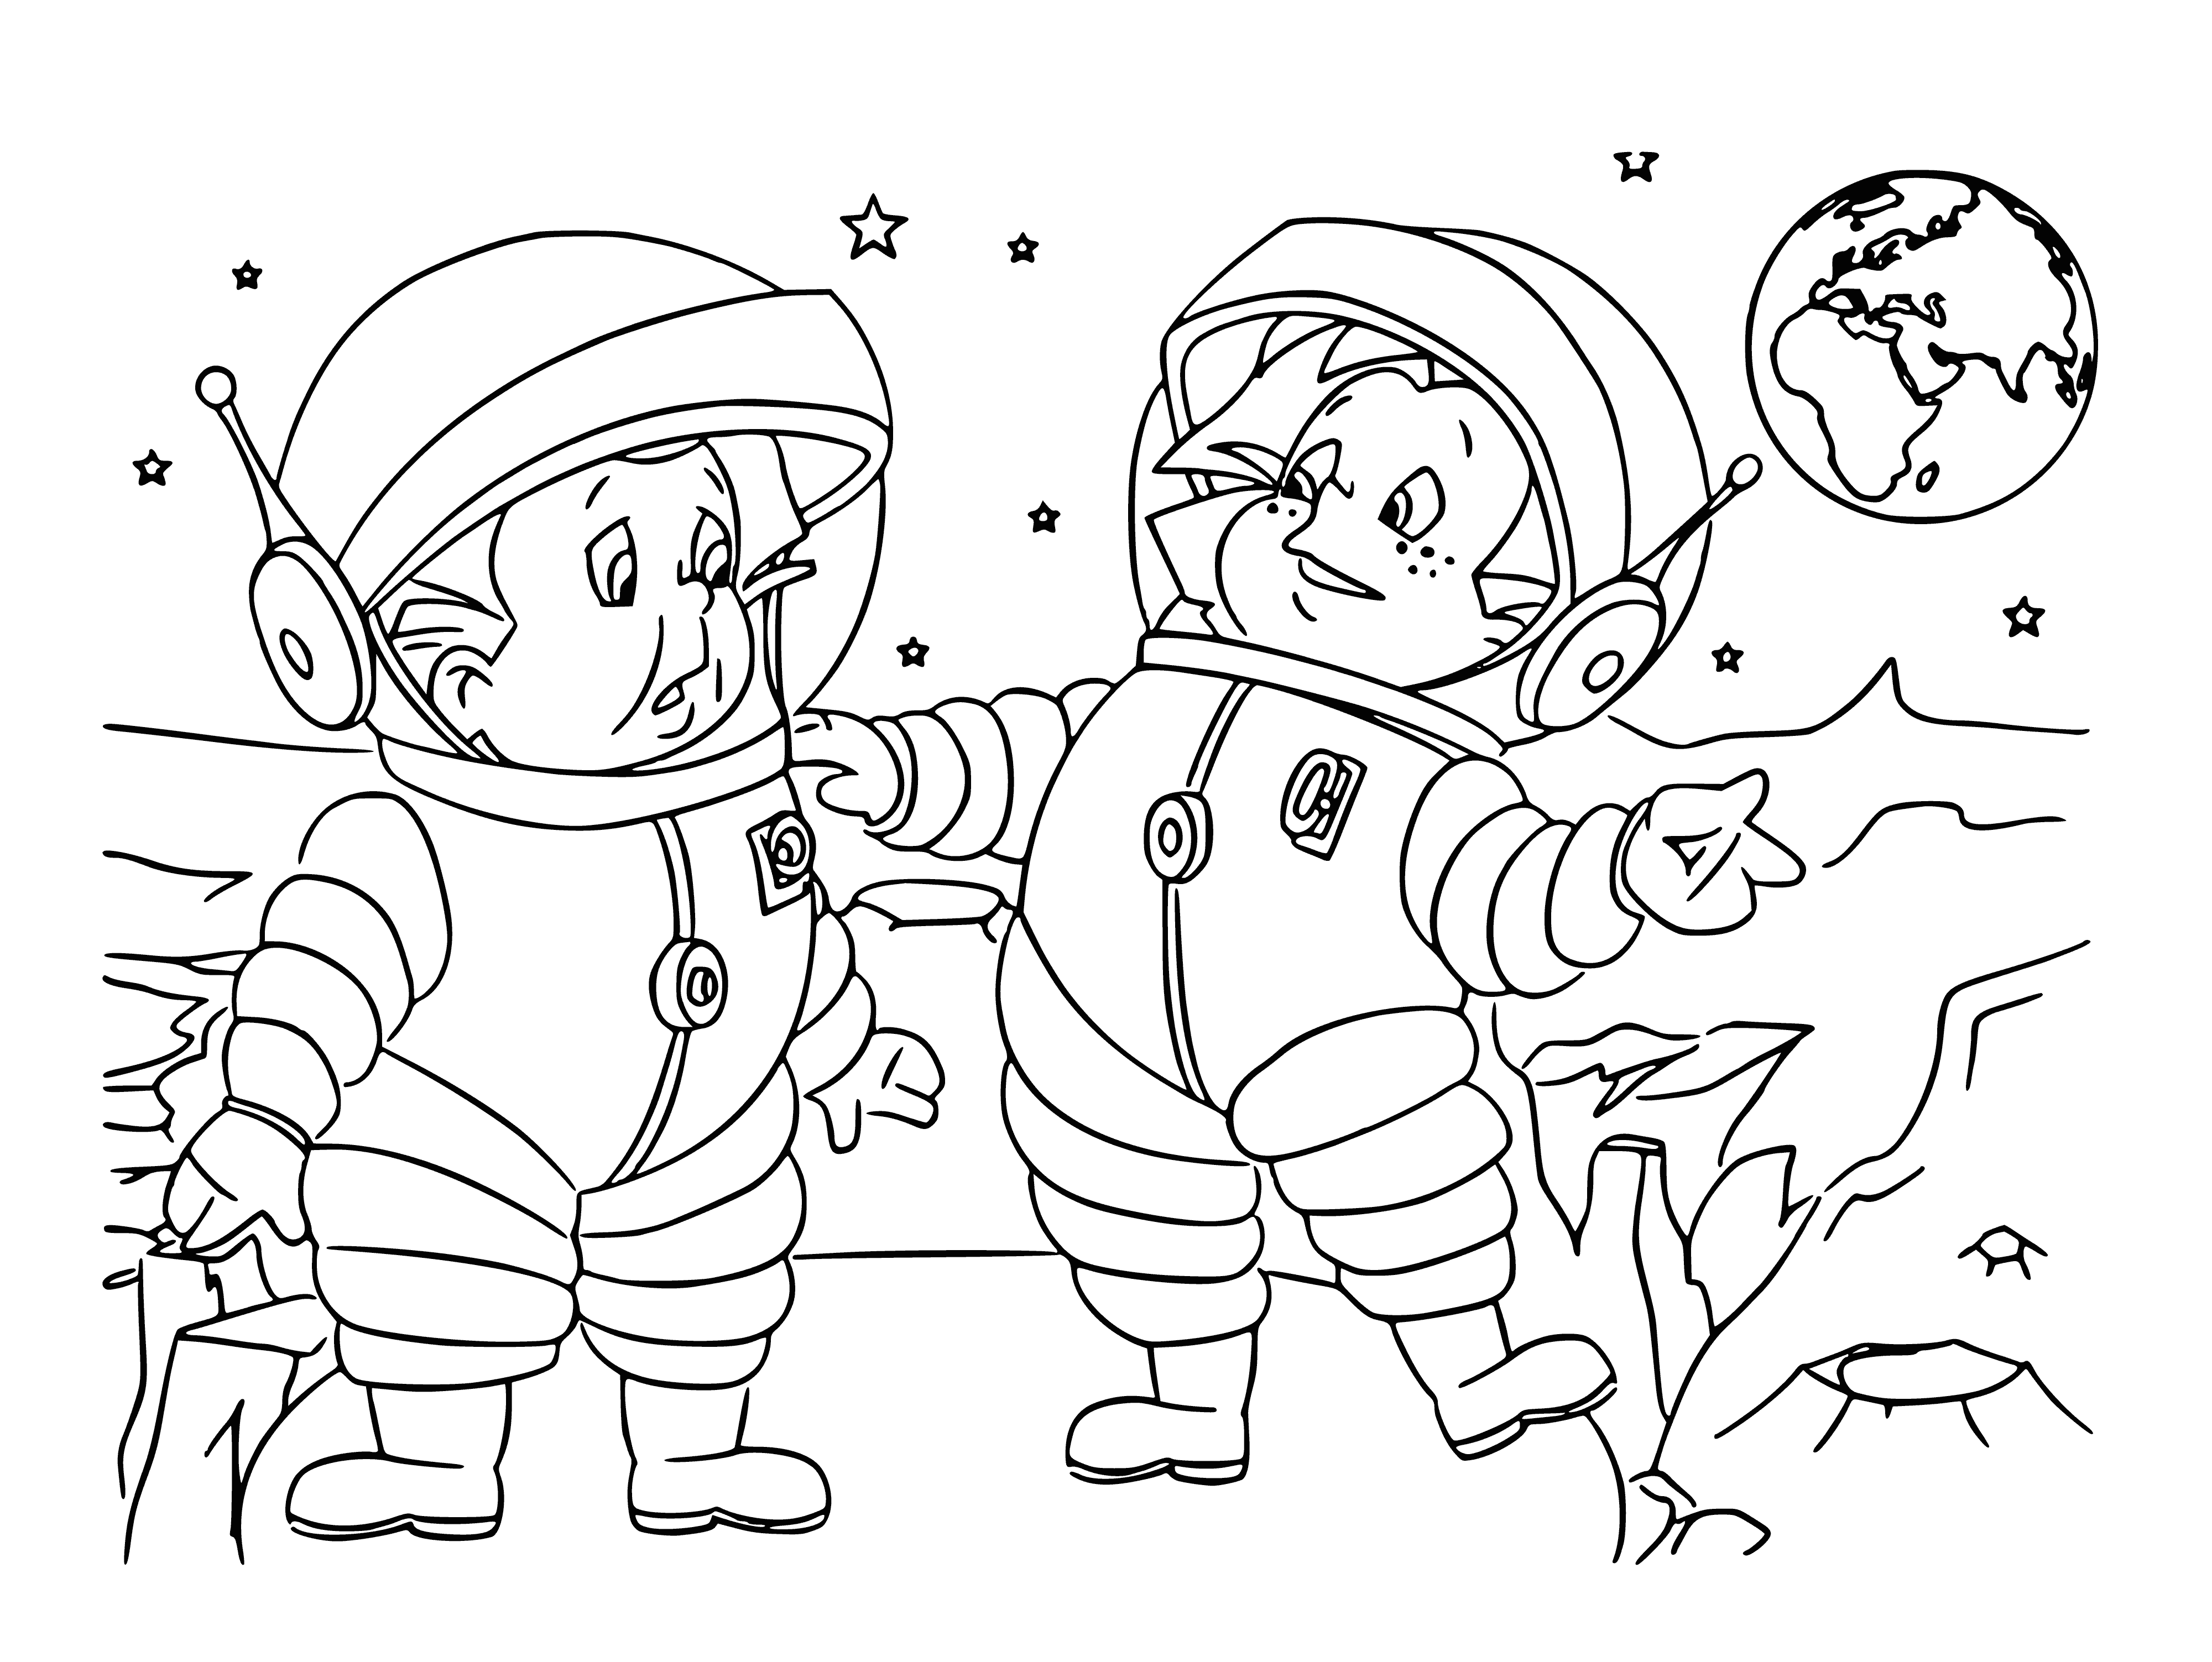 coloring page: Two creatures, resembling small dogs, in a spaceship with a donut and an expression of confusion. Both wearing helmets!